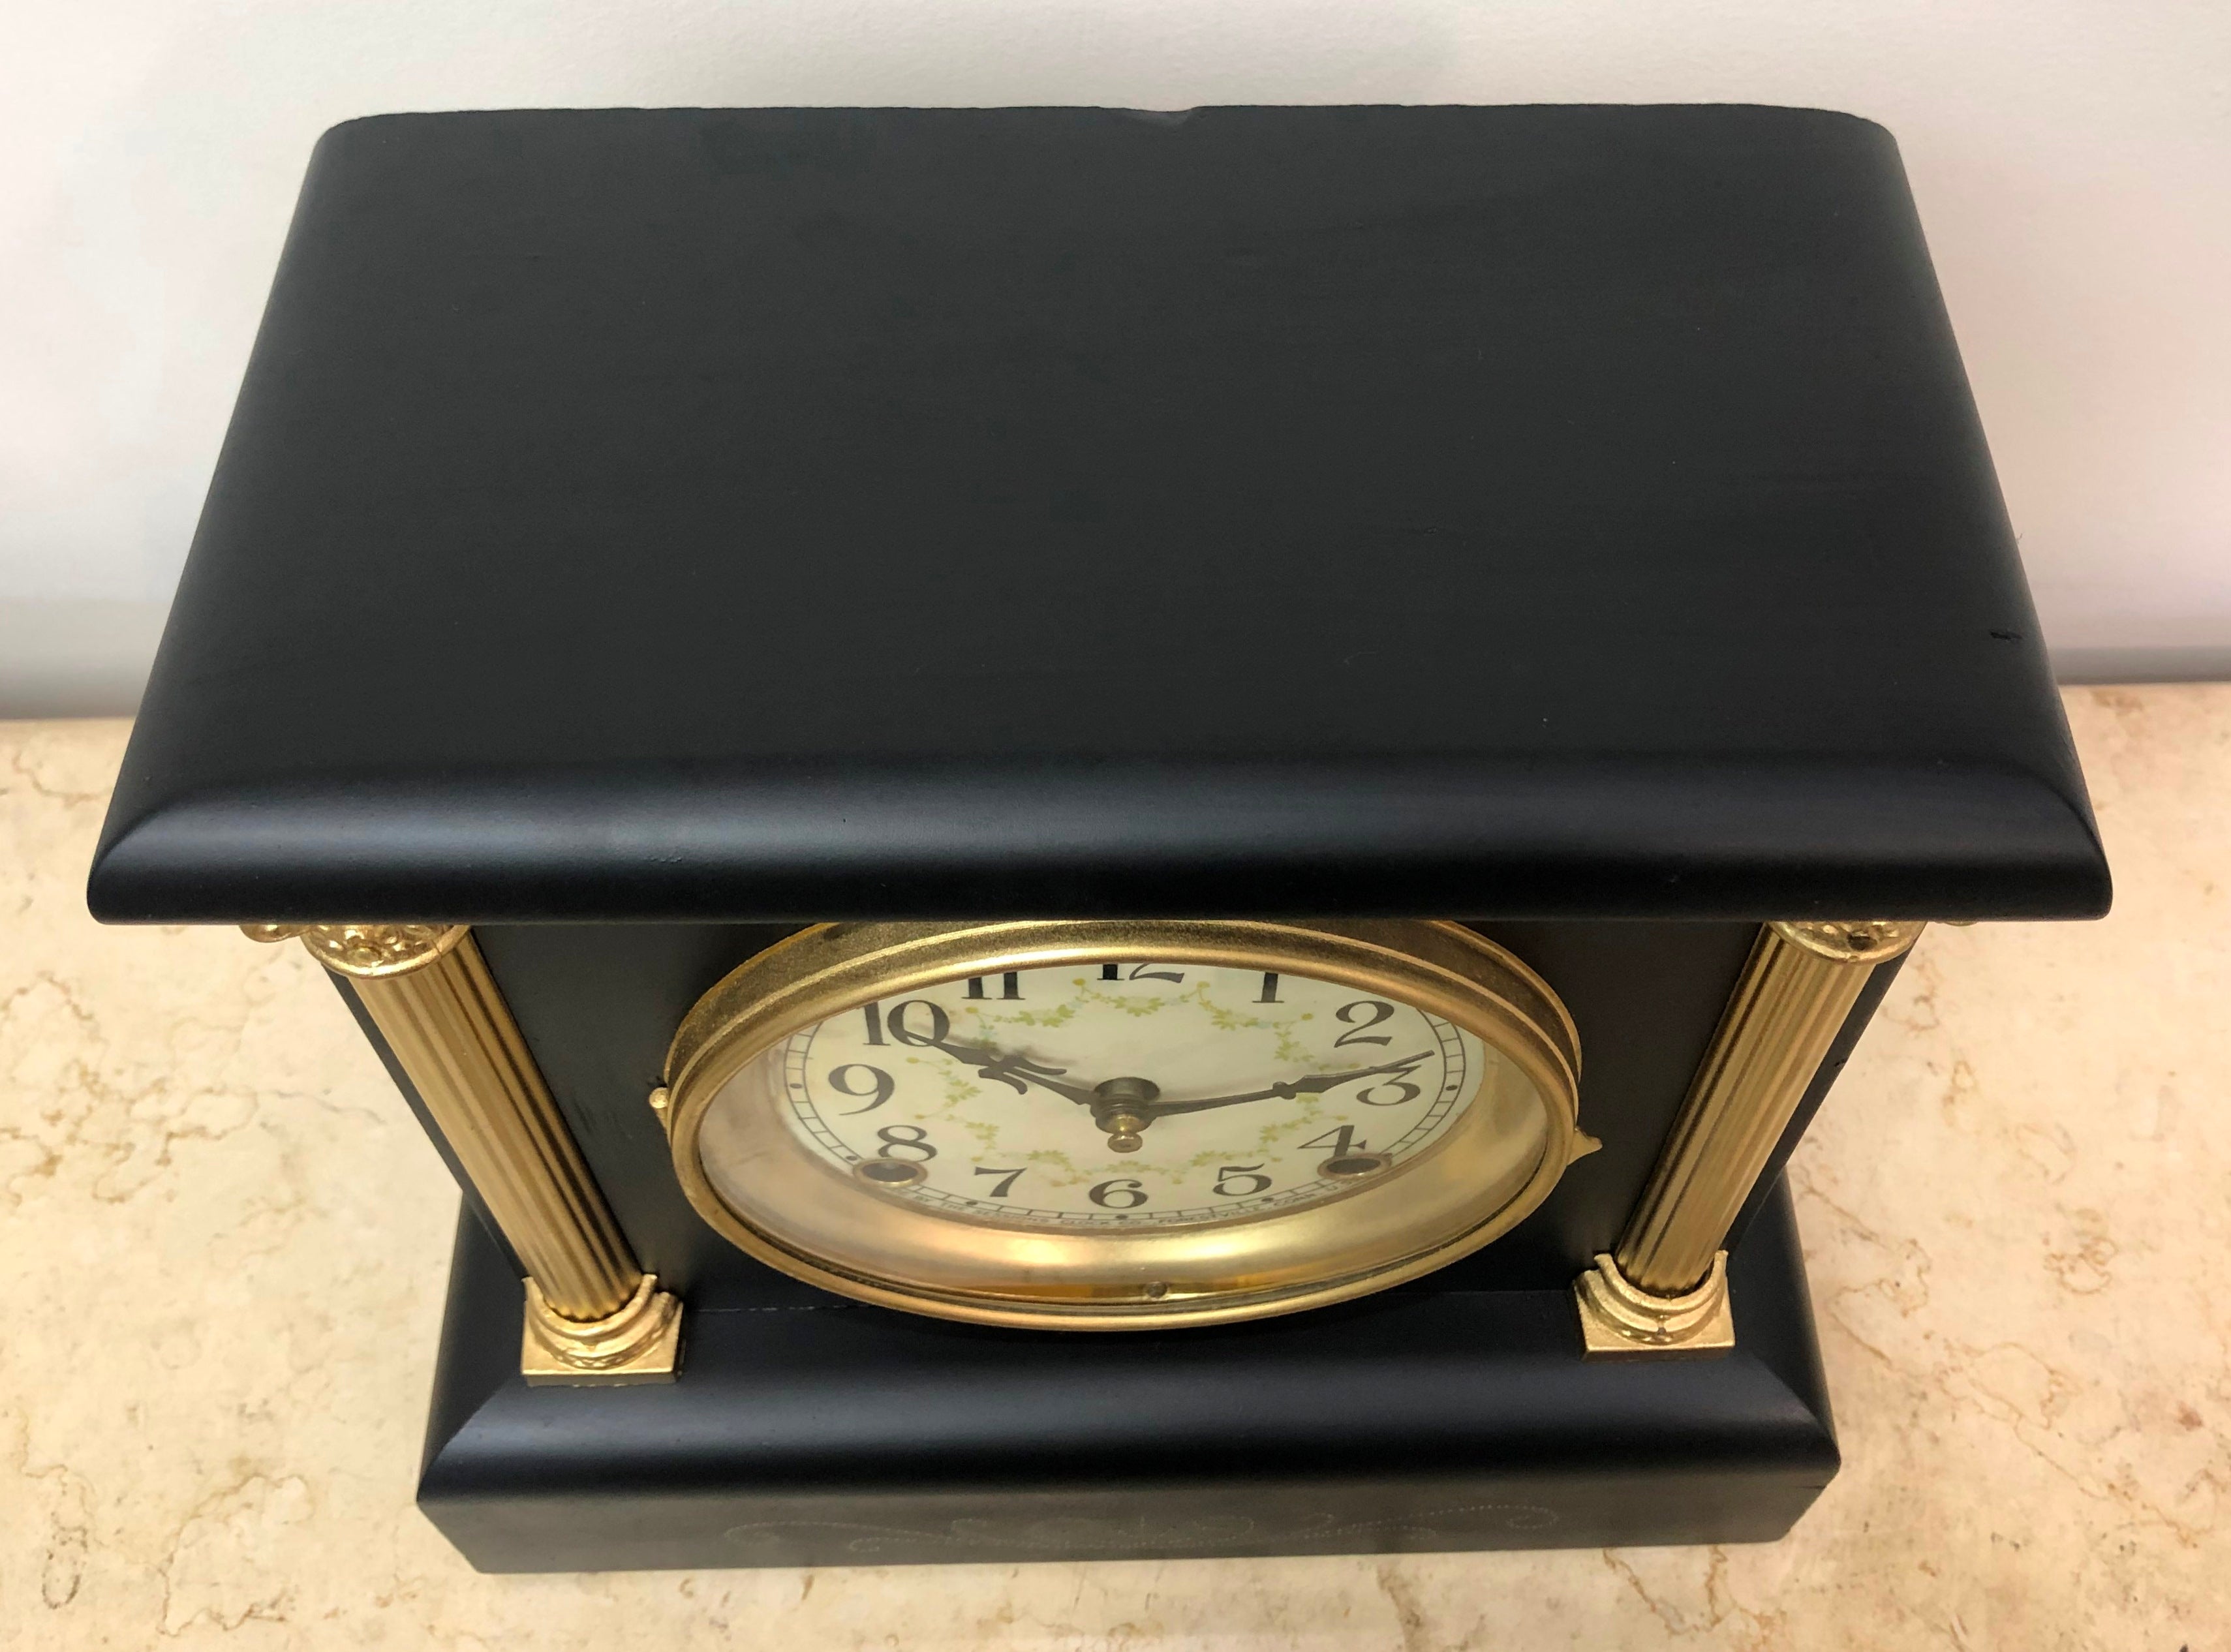 Antique Sessions USA Bell & Hammer Chime Mantel Clock | eXibit collection